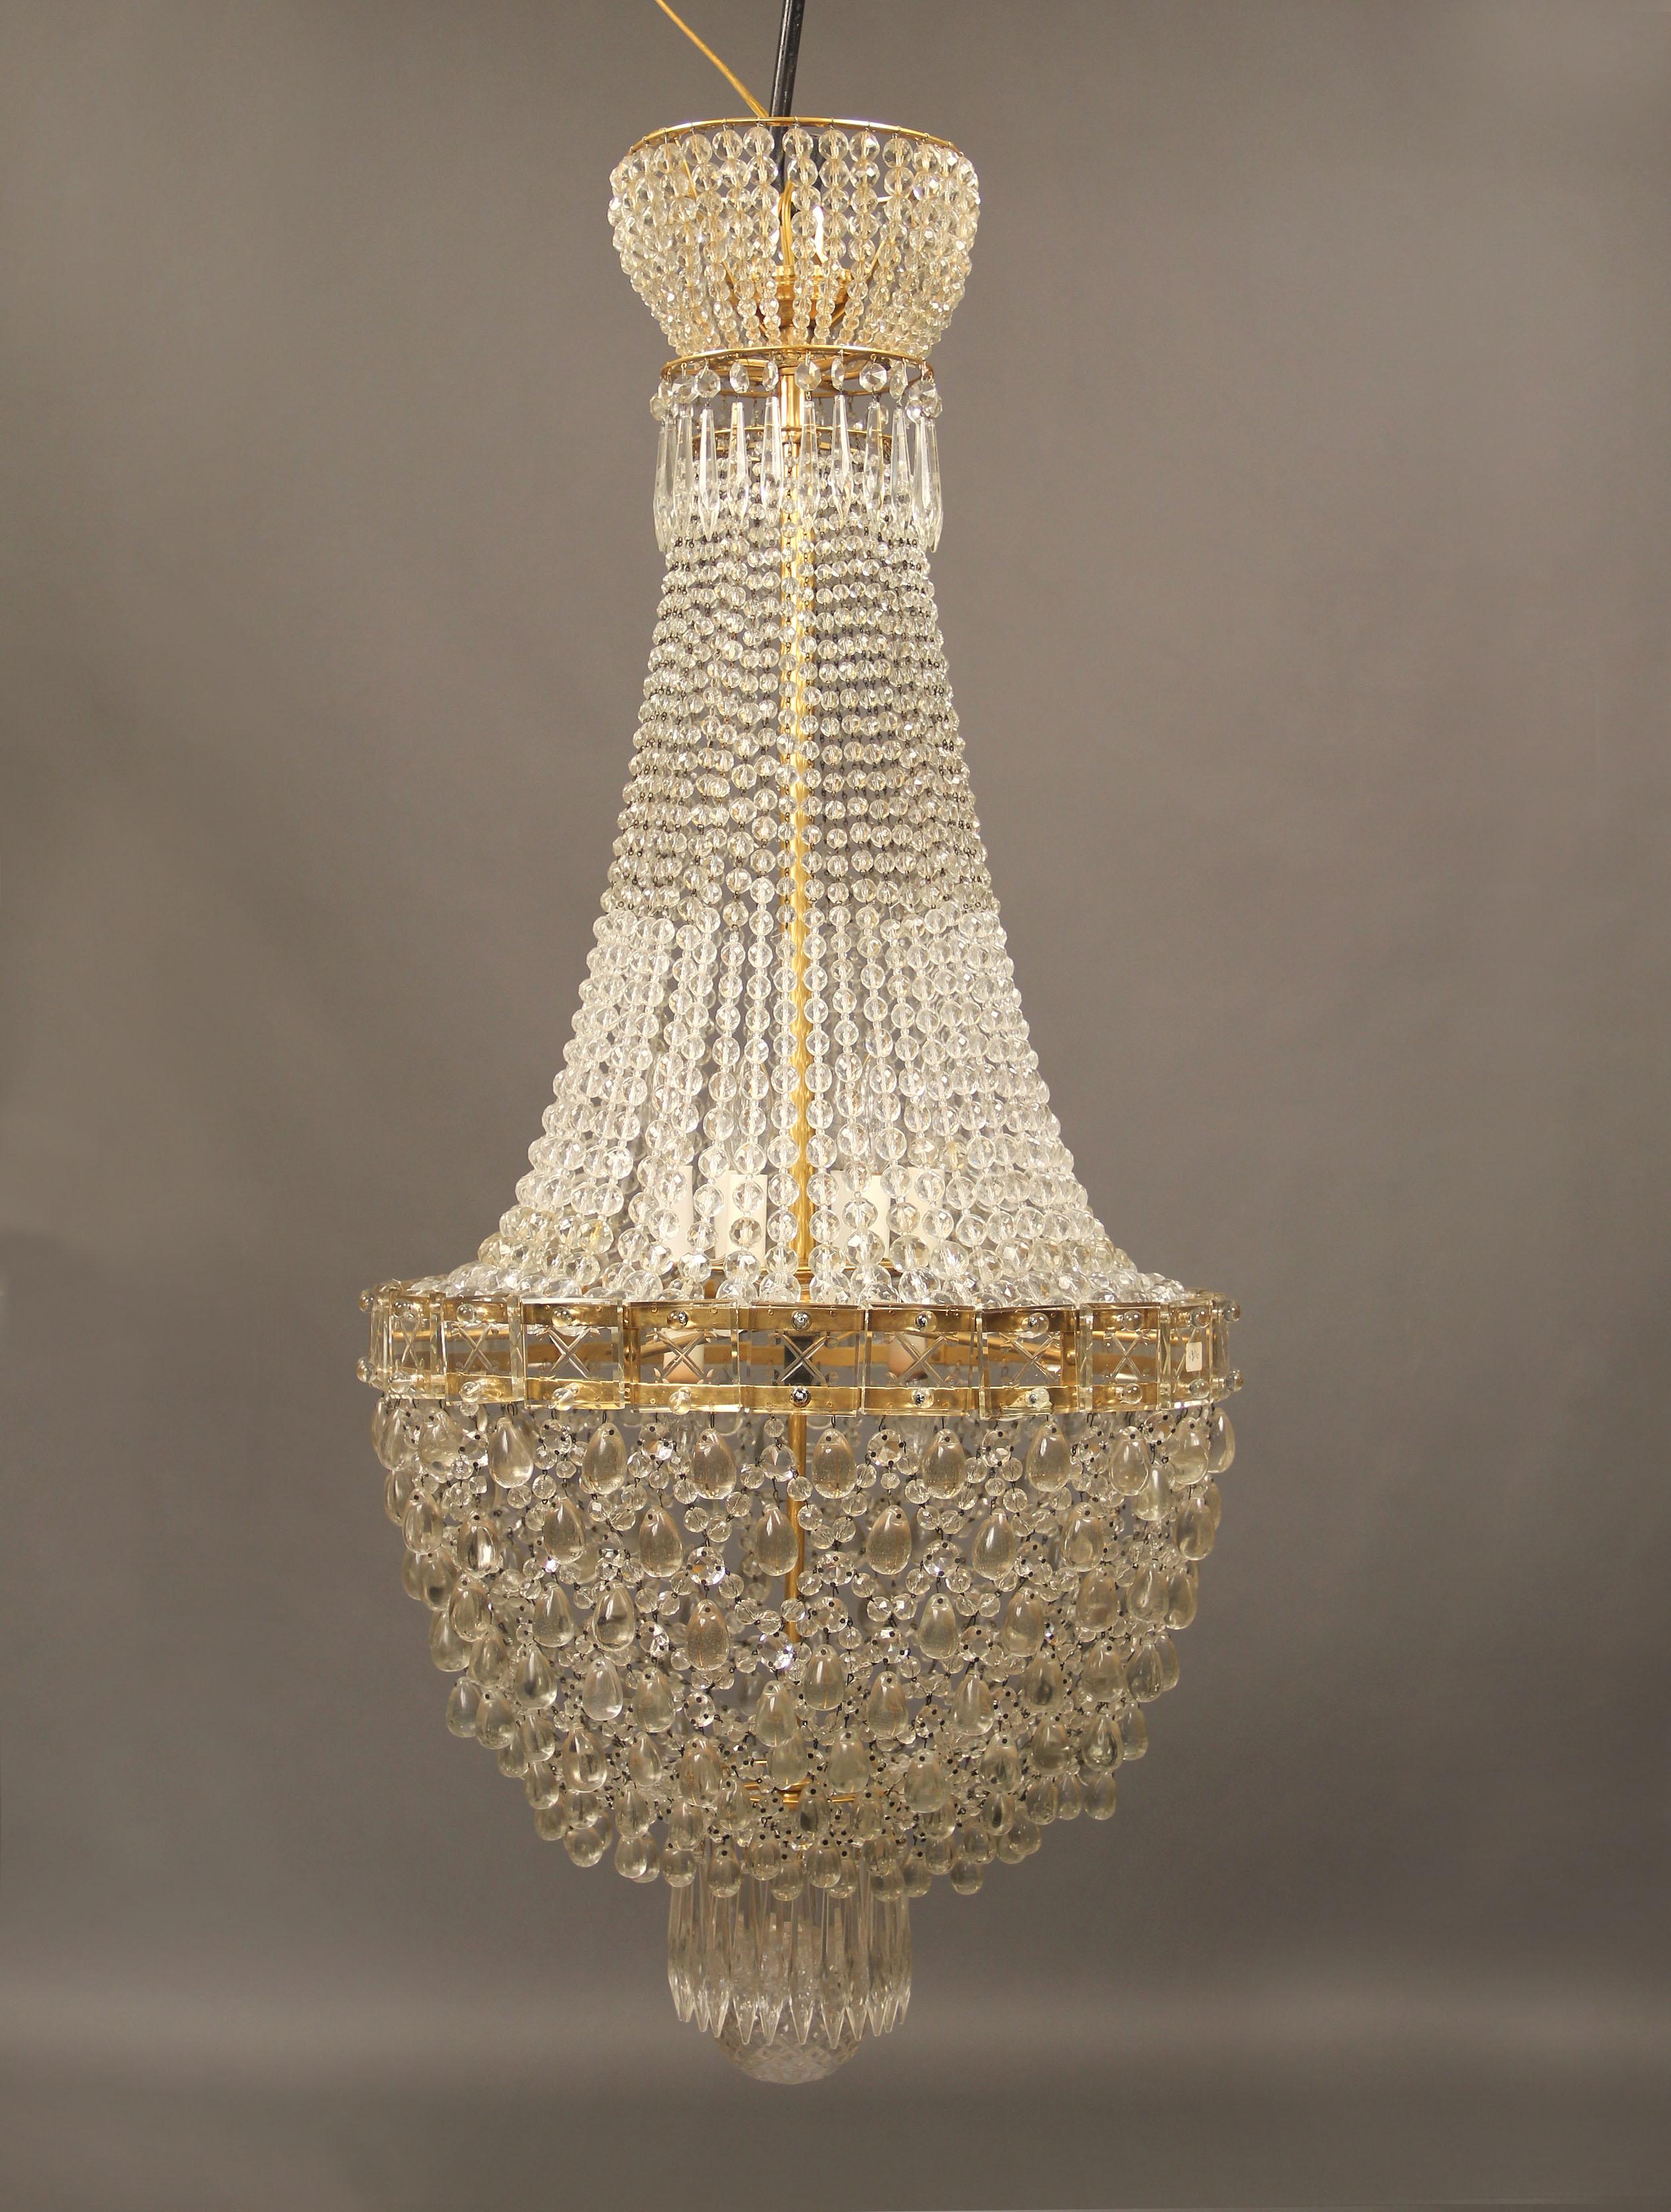 Late 19th/Early 20th Century Gilt Bronze and Beaded Eight Light Basket Chandelier

The beaded crown with a gilt bronze rim, beaded strings run down to a fine etched square crystal frame, the basket with intertwined large crystal bulbs and beads,